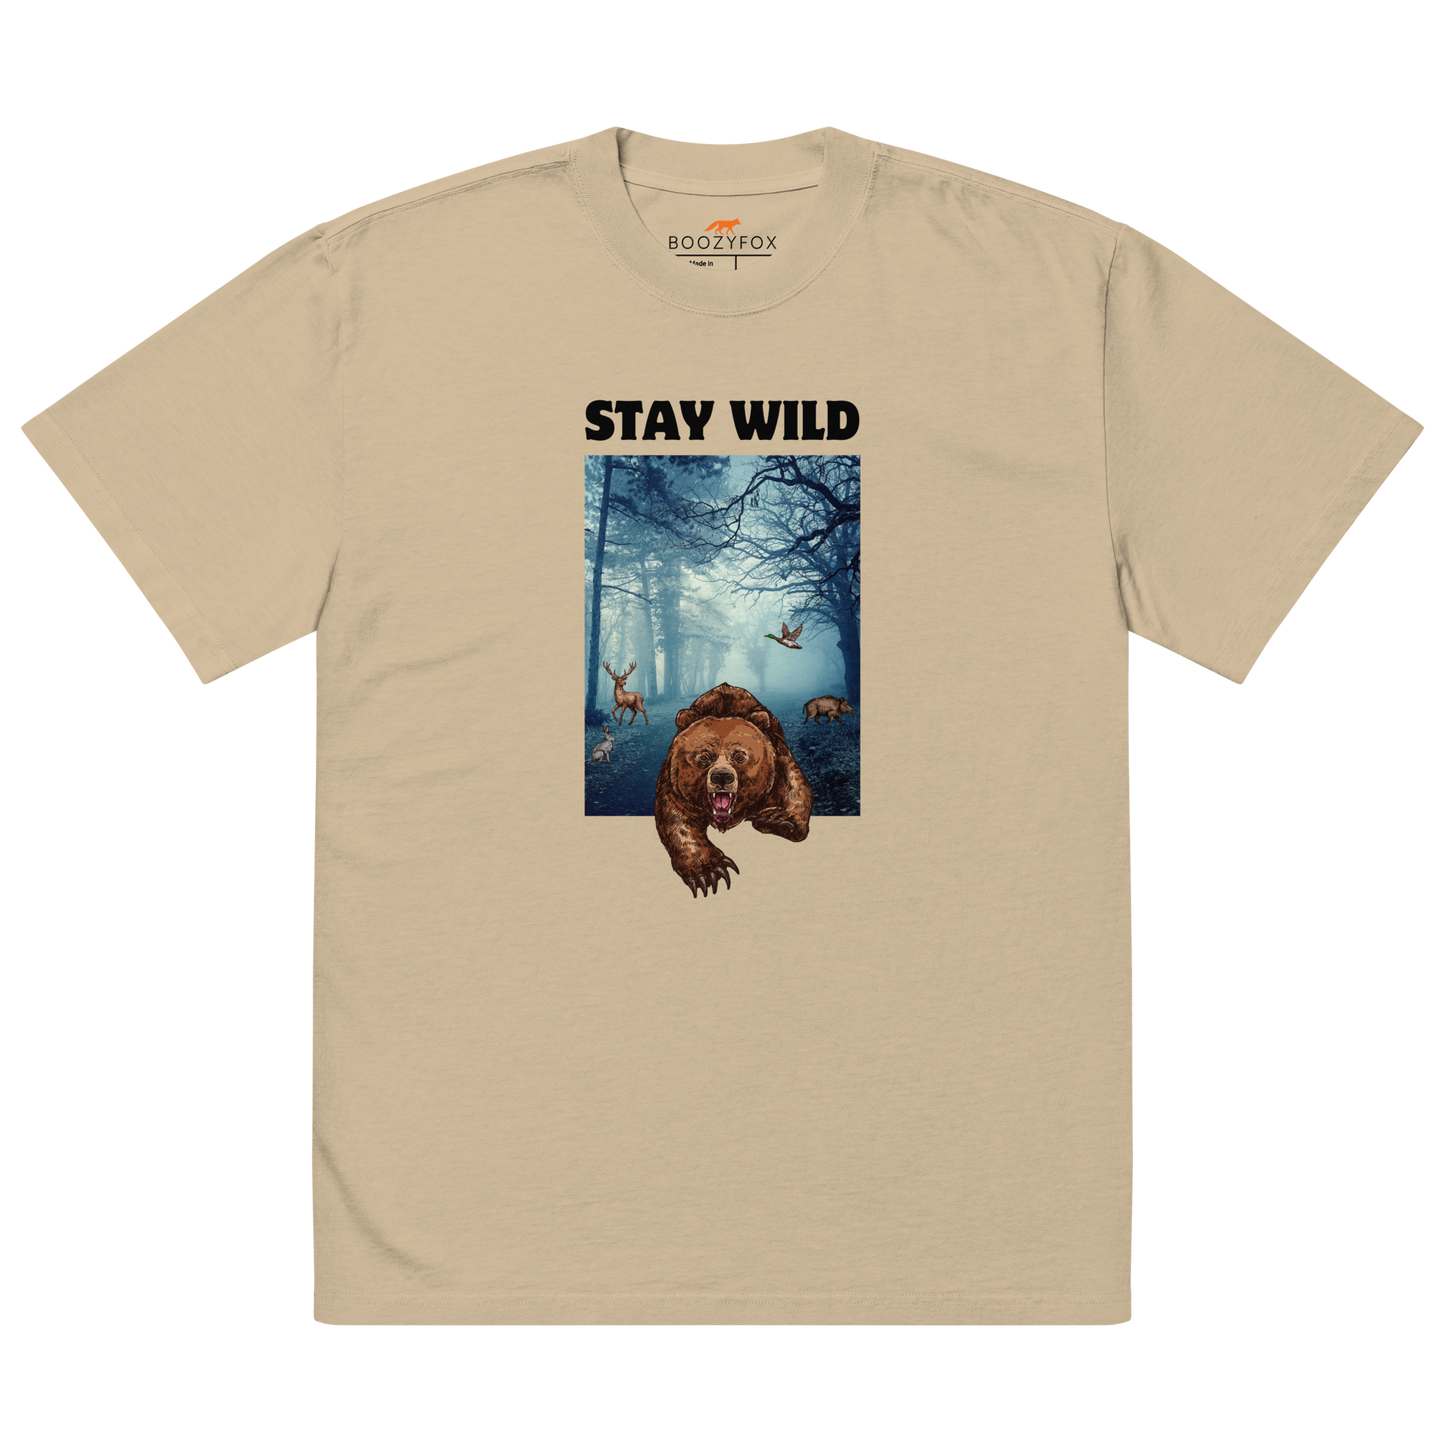 Faded Khaki Bear Oversized T-Shirt featuring a Stay Wild graphic on the chest - Cool Graphic Bear Oversized Tees - Boozy Fox